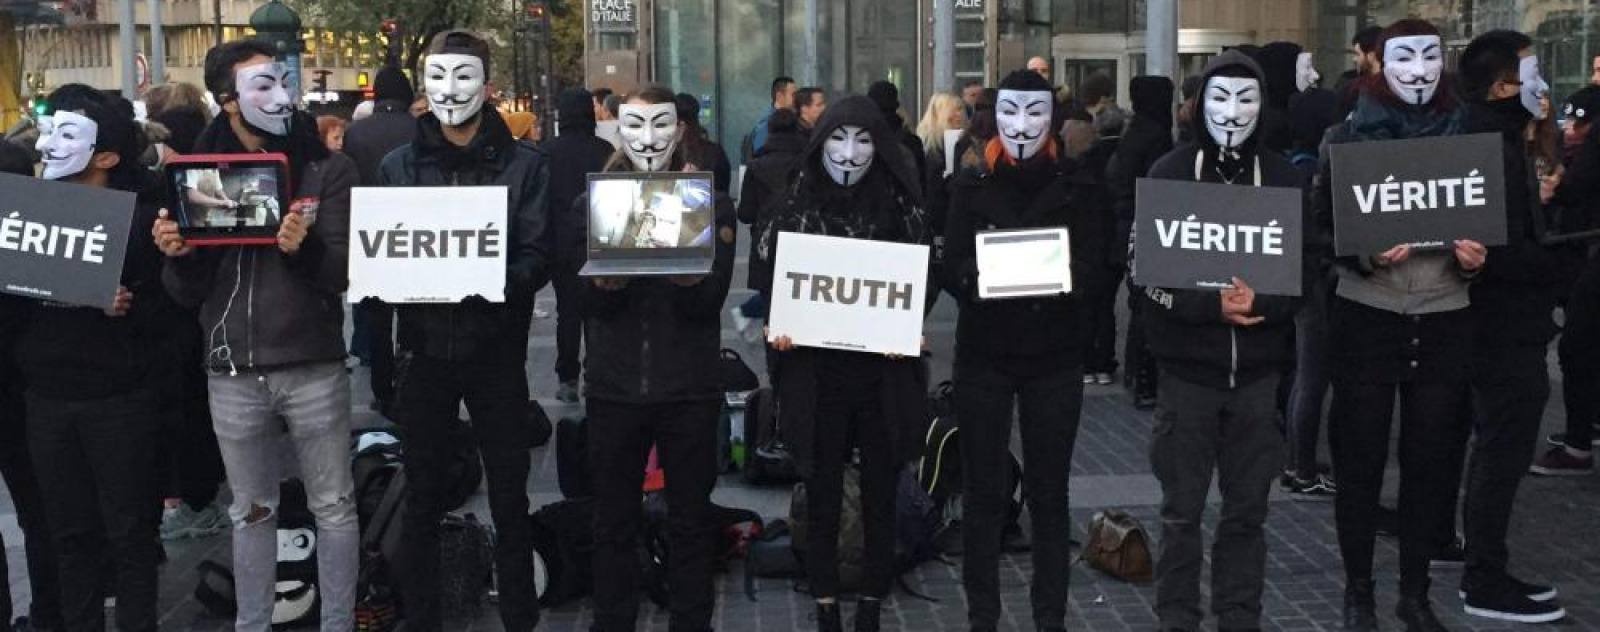 anonymous for the voiceless